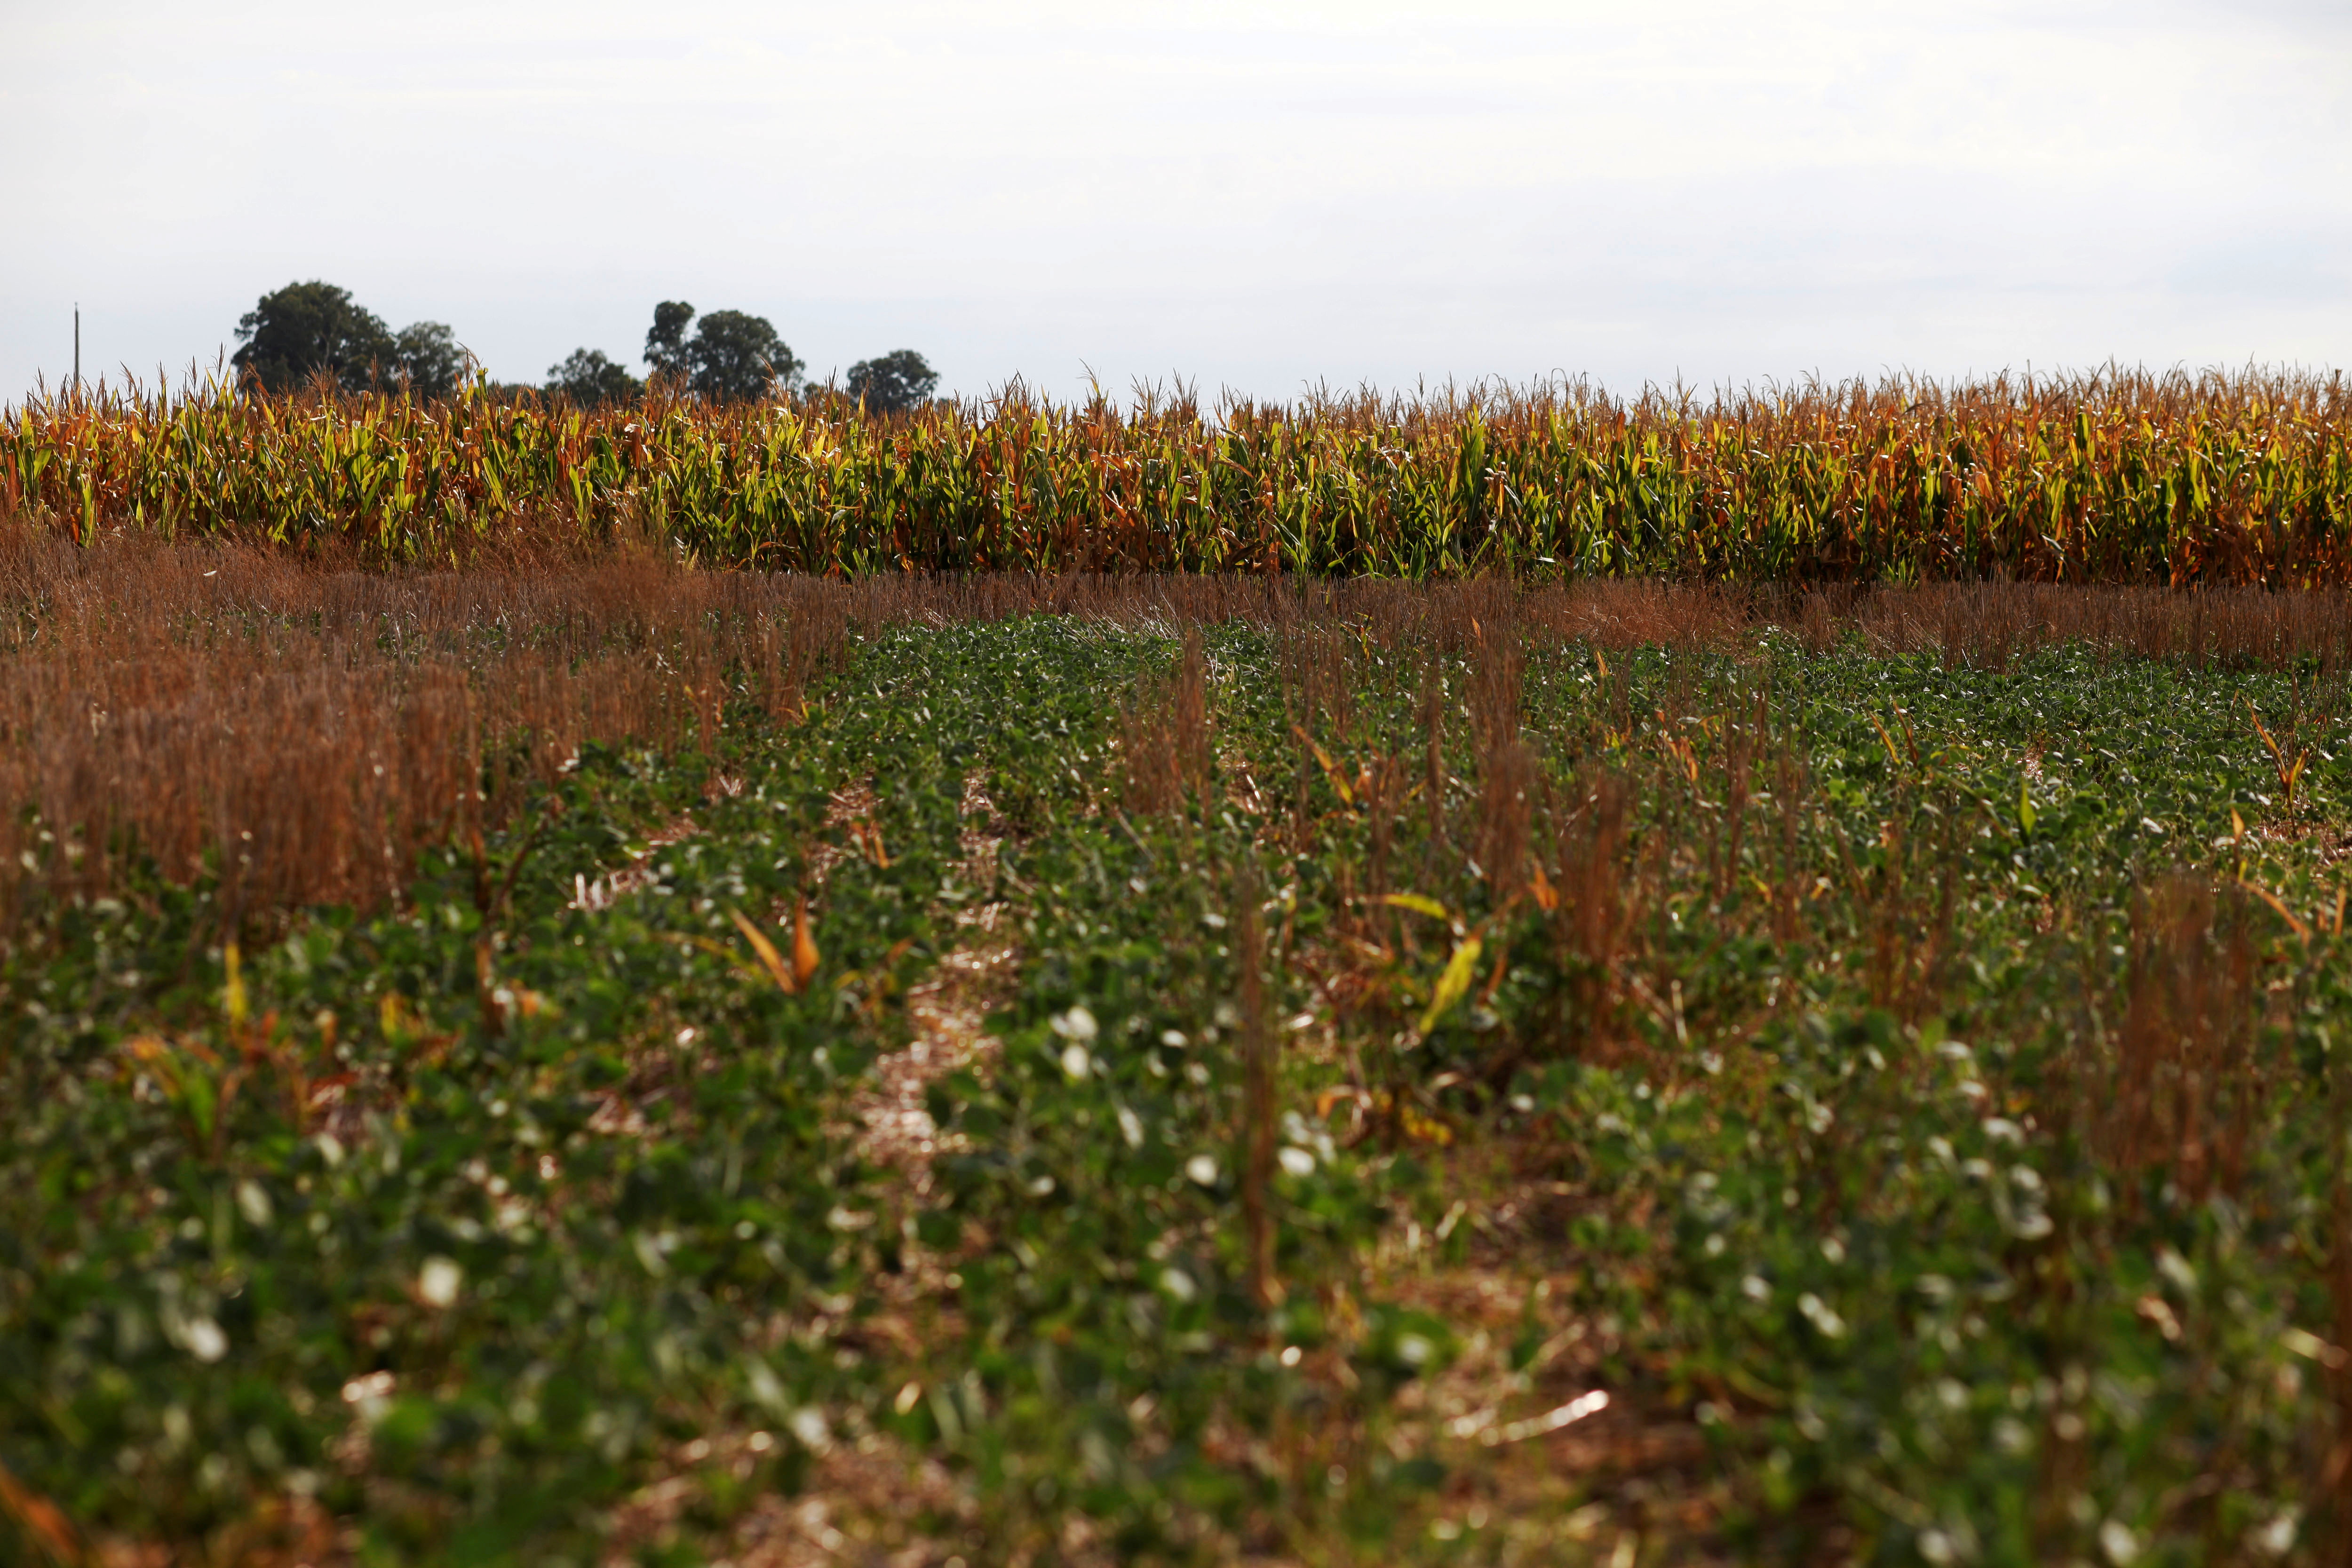 Soy and corn plants are seen in a drought-affected farm near Chivilcoy